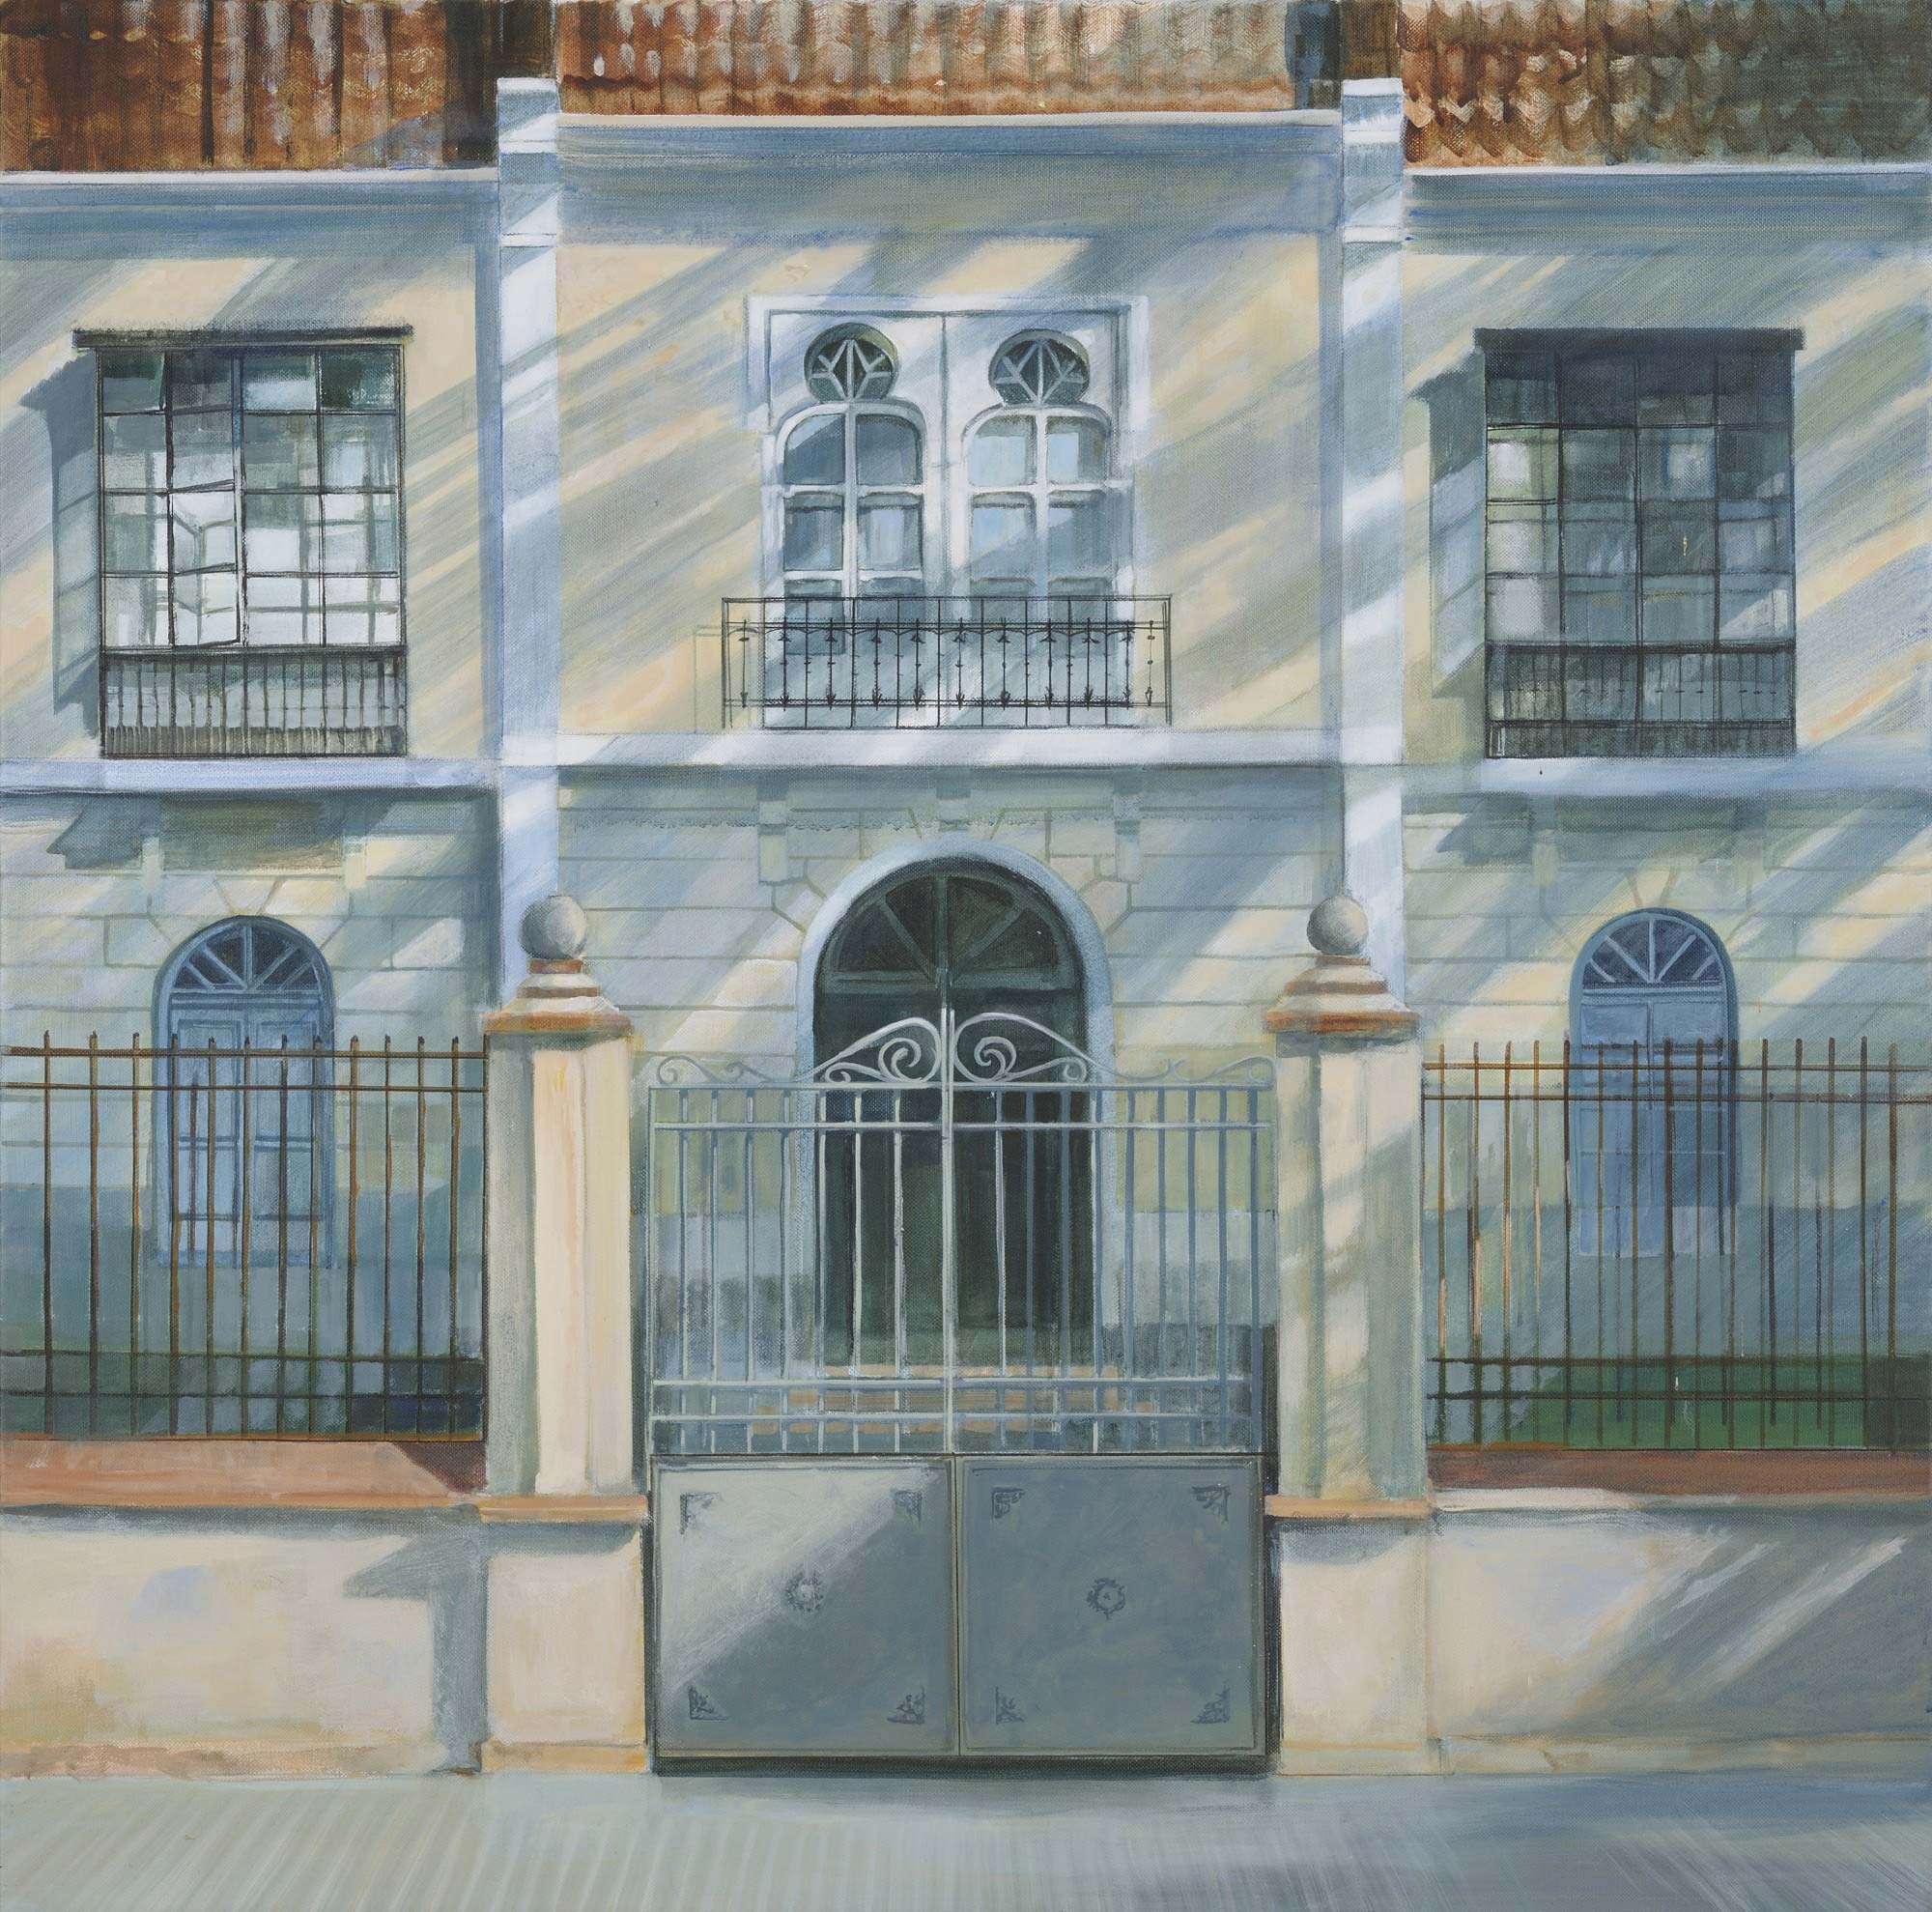 Building in Seville by Rupert Brown